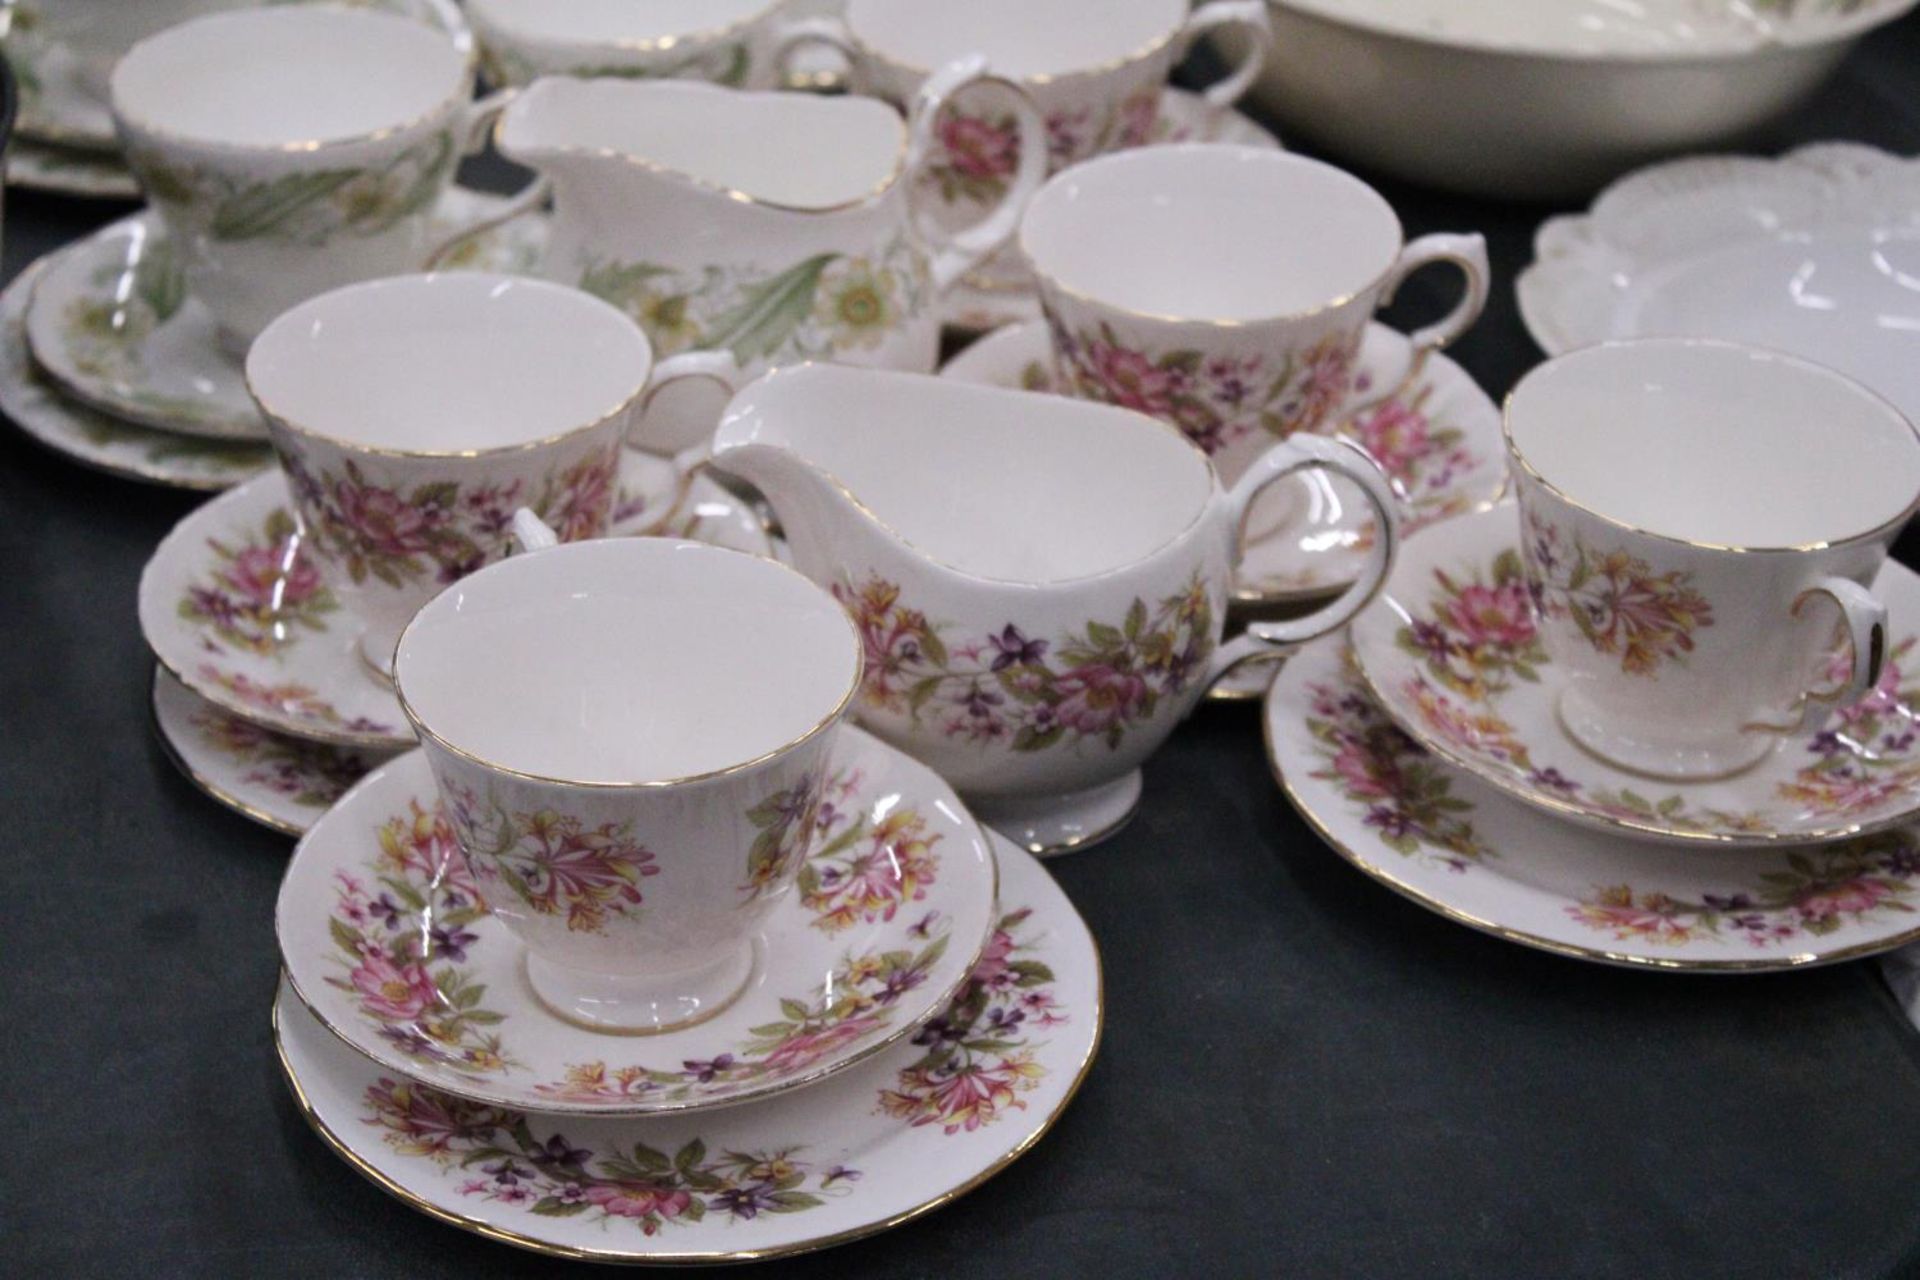 A QUANTITY OF CHINA CUPS, SAUCERS, SIDE PLATES AND CREAM JUGS BY COLCLOUGH AND DUCHESS - Image 2 of 6